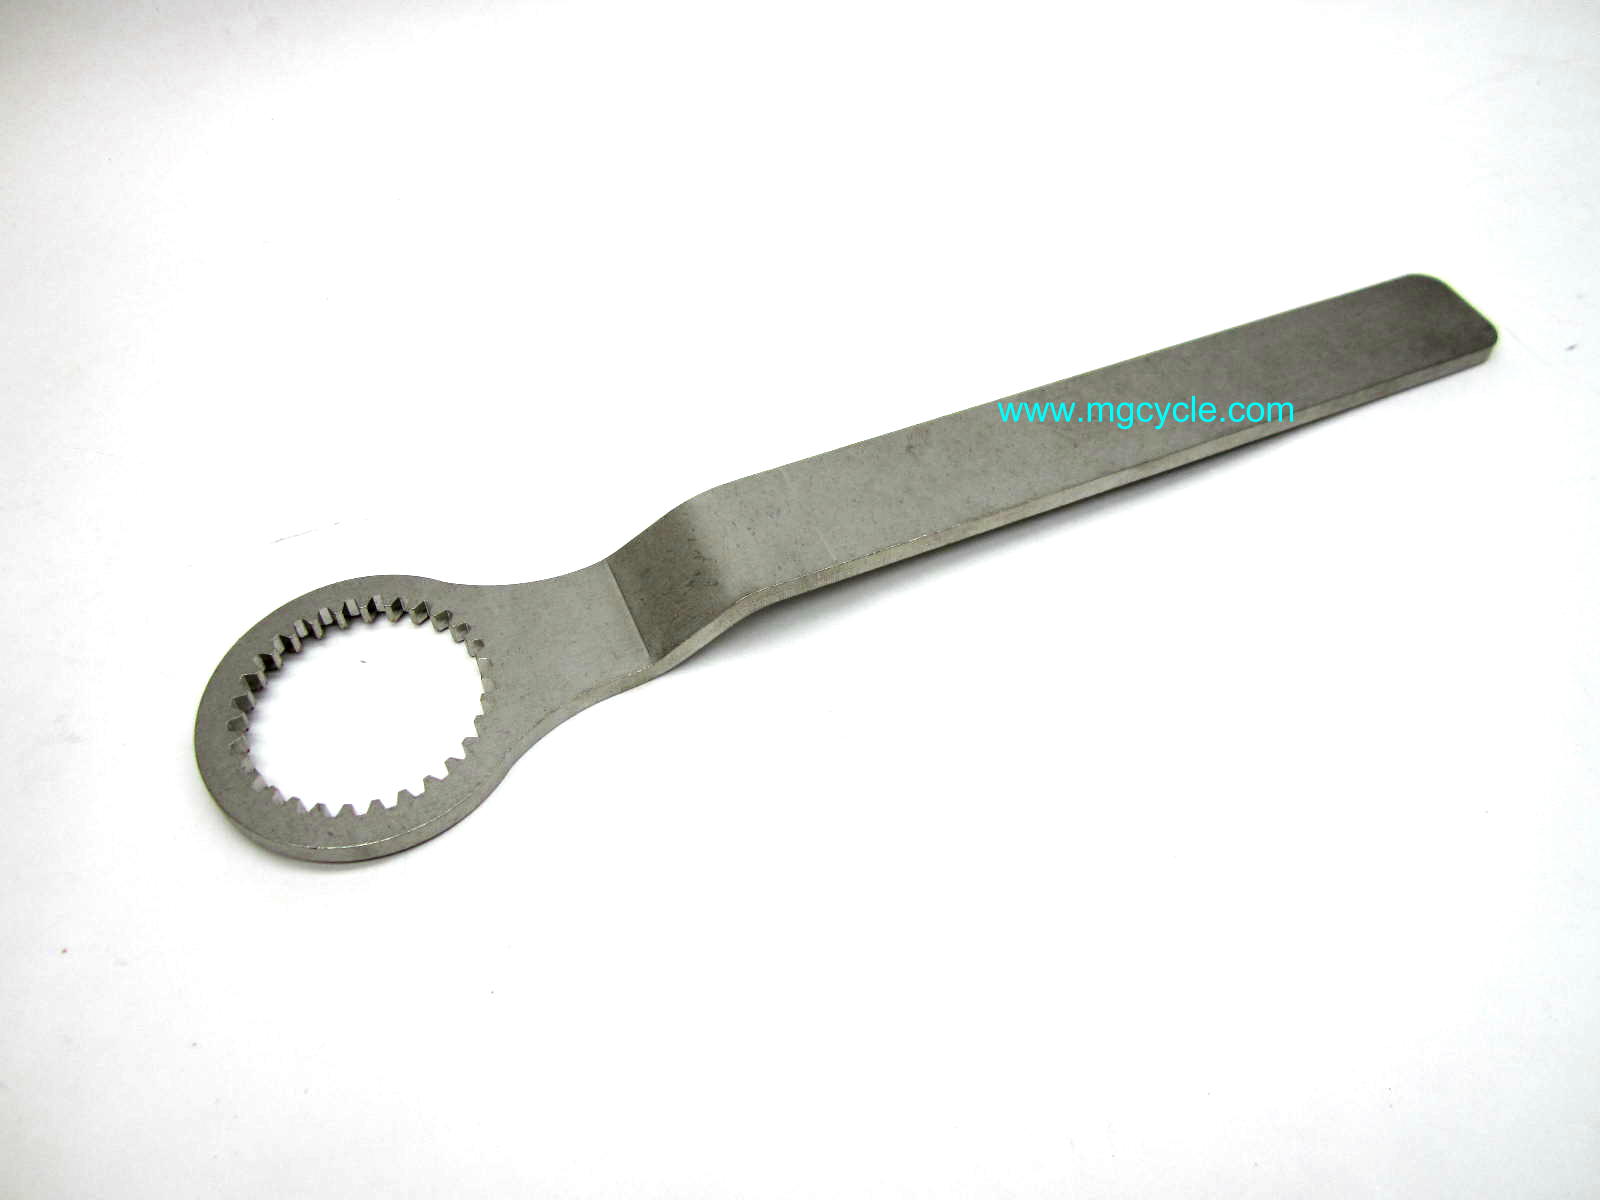 Improved clutch hub holding tool fits 2 and 4mm hubs GU30912810 - Click Image to Close